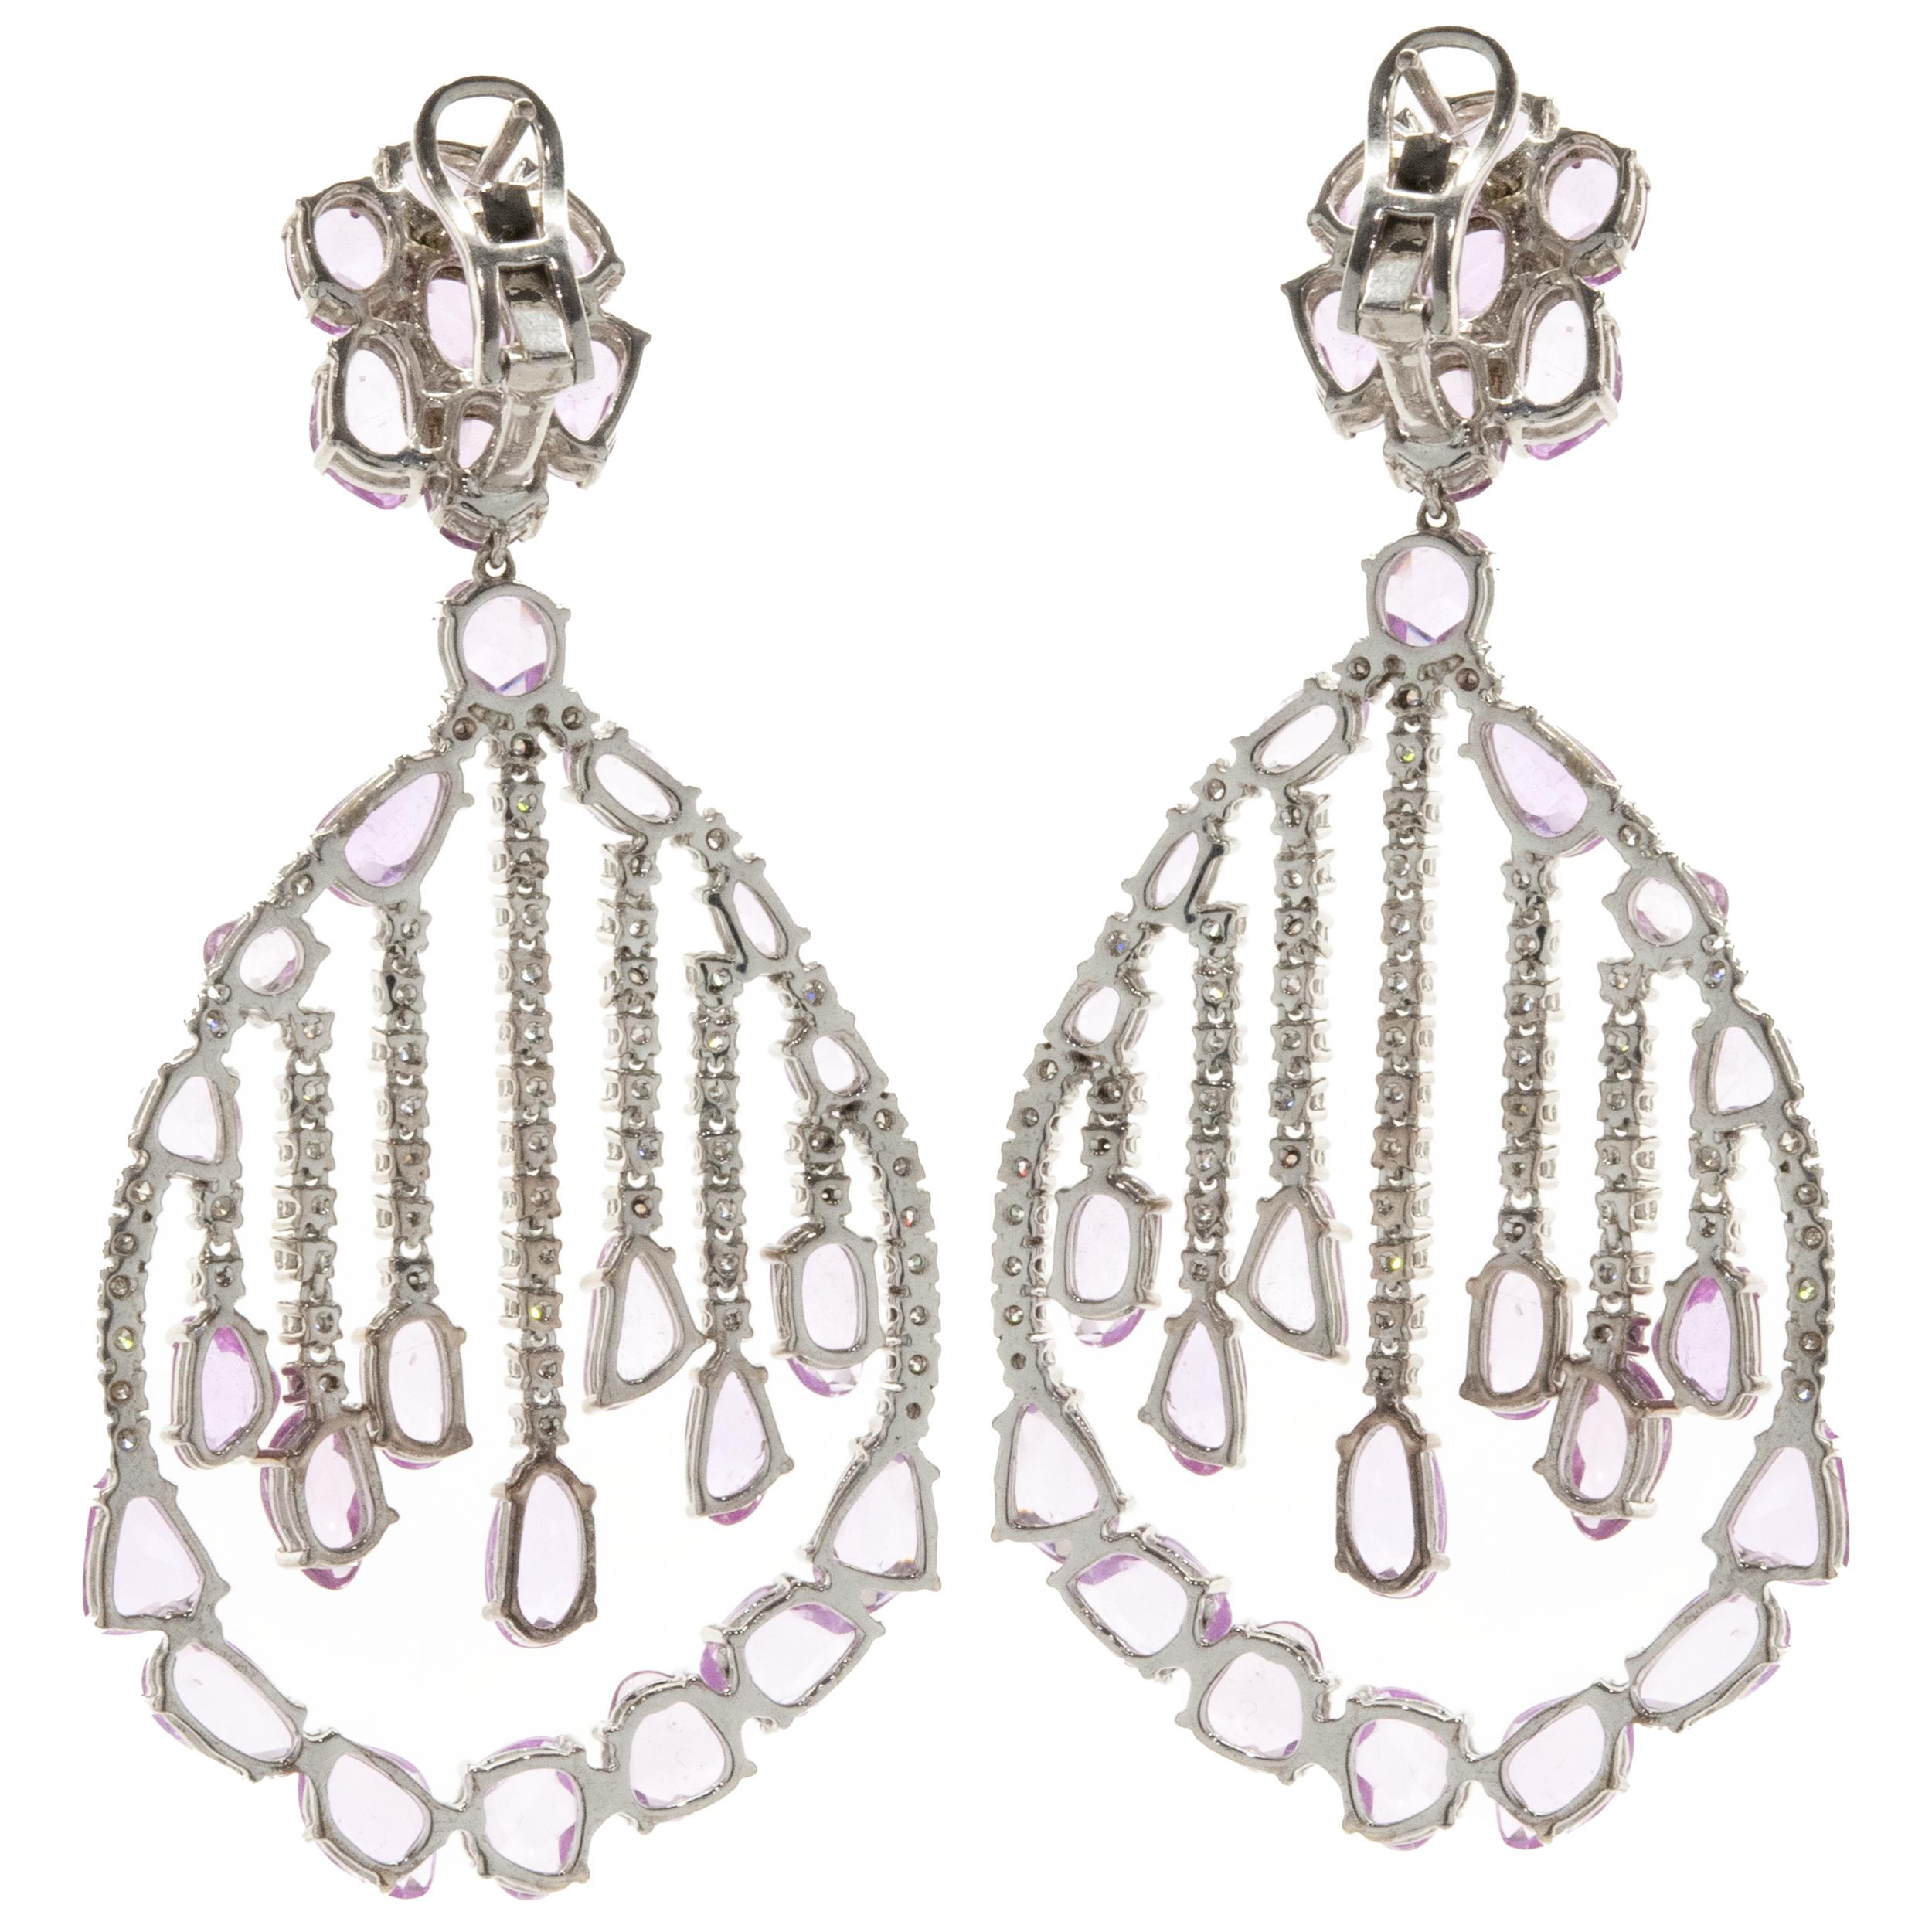 Designer: custom
Material: 18K white gold
Diamonds: 134 round brilliant cut = 2.90cttw
Color: G
Clarity: SI1
Pink Sapphires: 56 multi cut = 21.98cttw
Dimensions: earrings measure 2.5-inches in length
Fastenings: posts with omega backs
Weight: 26.12